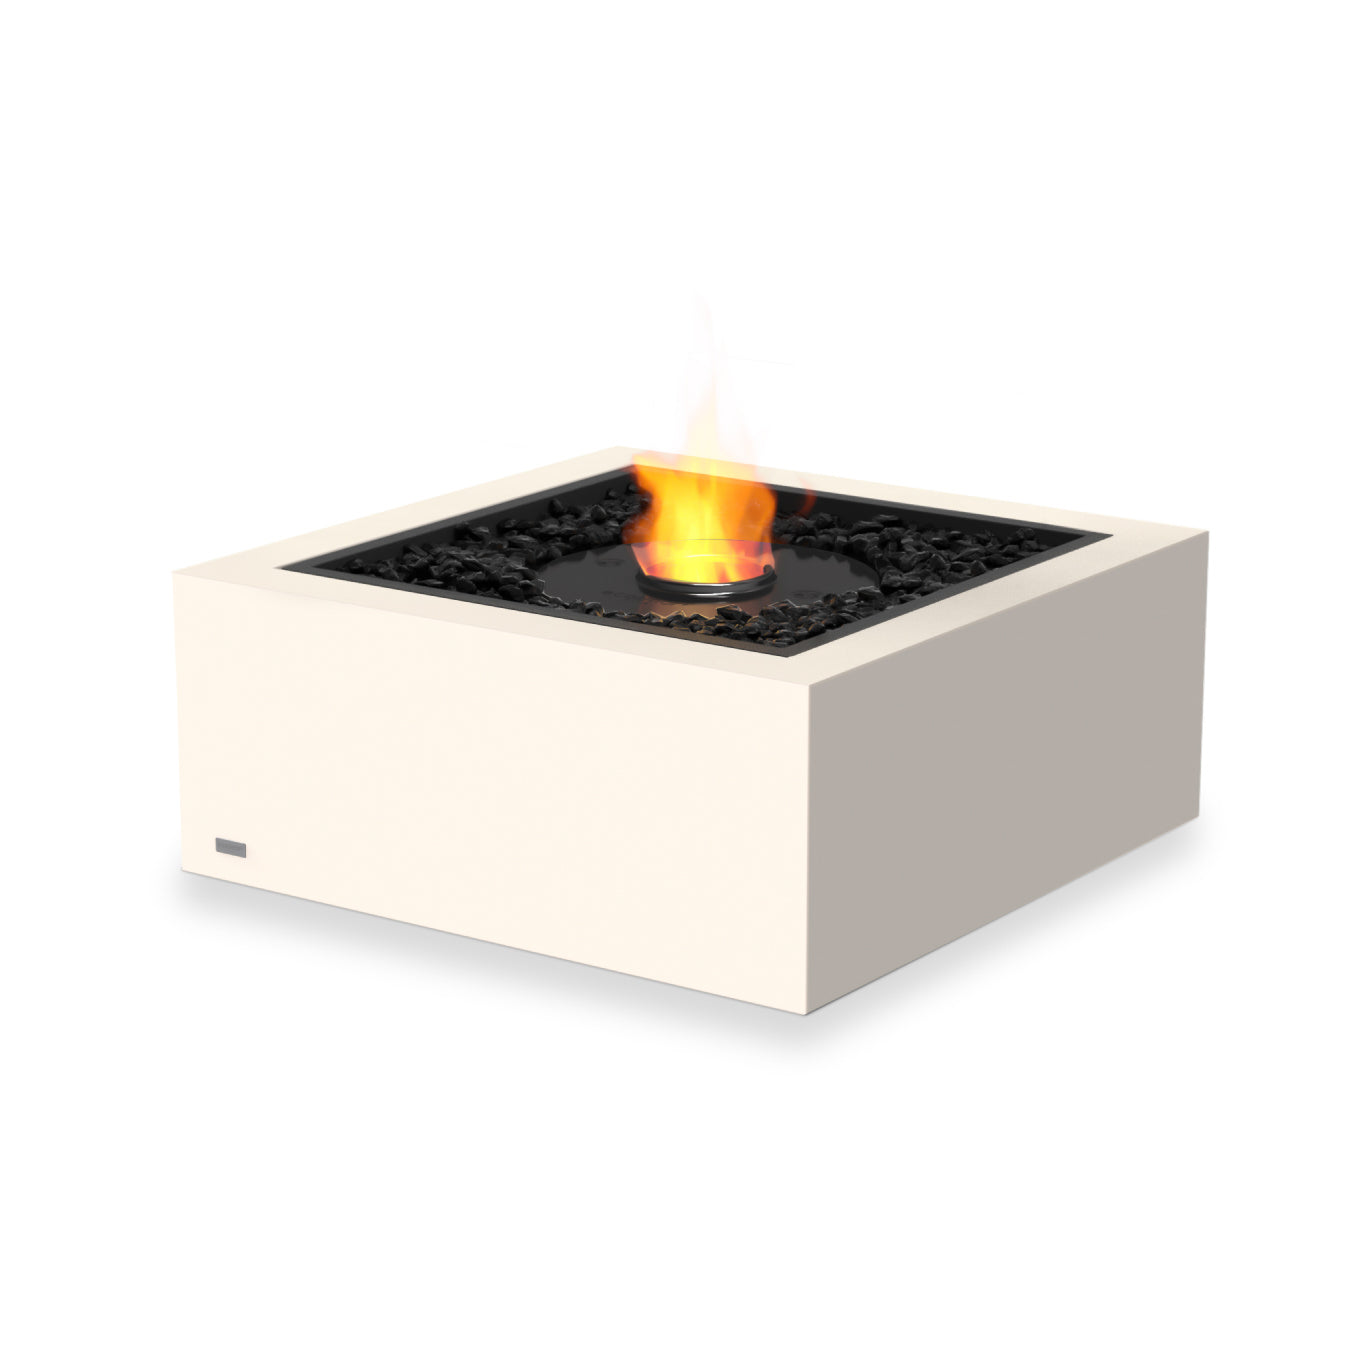 BASE 30 FIRE PIT TABLE - ETHANOL